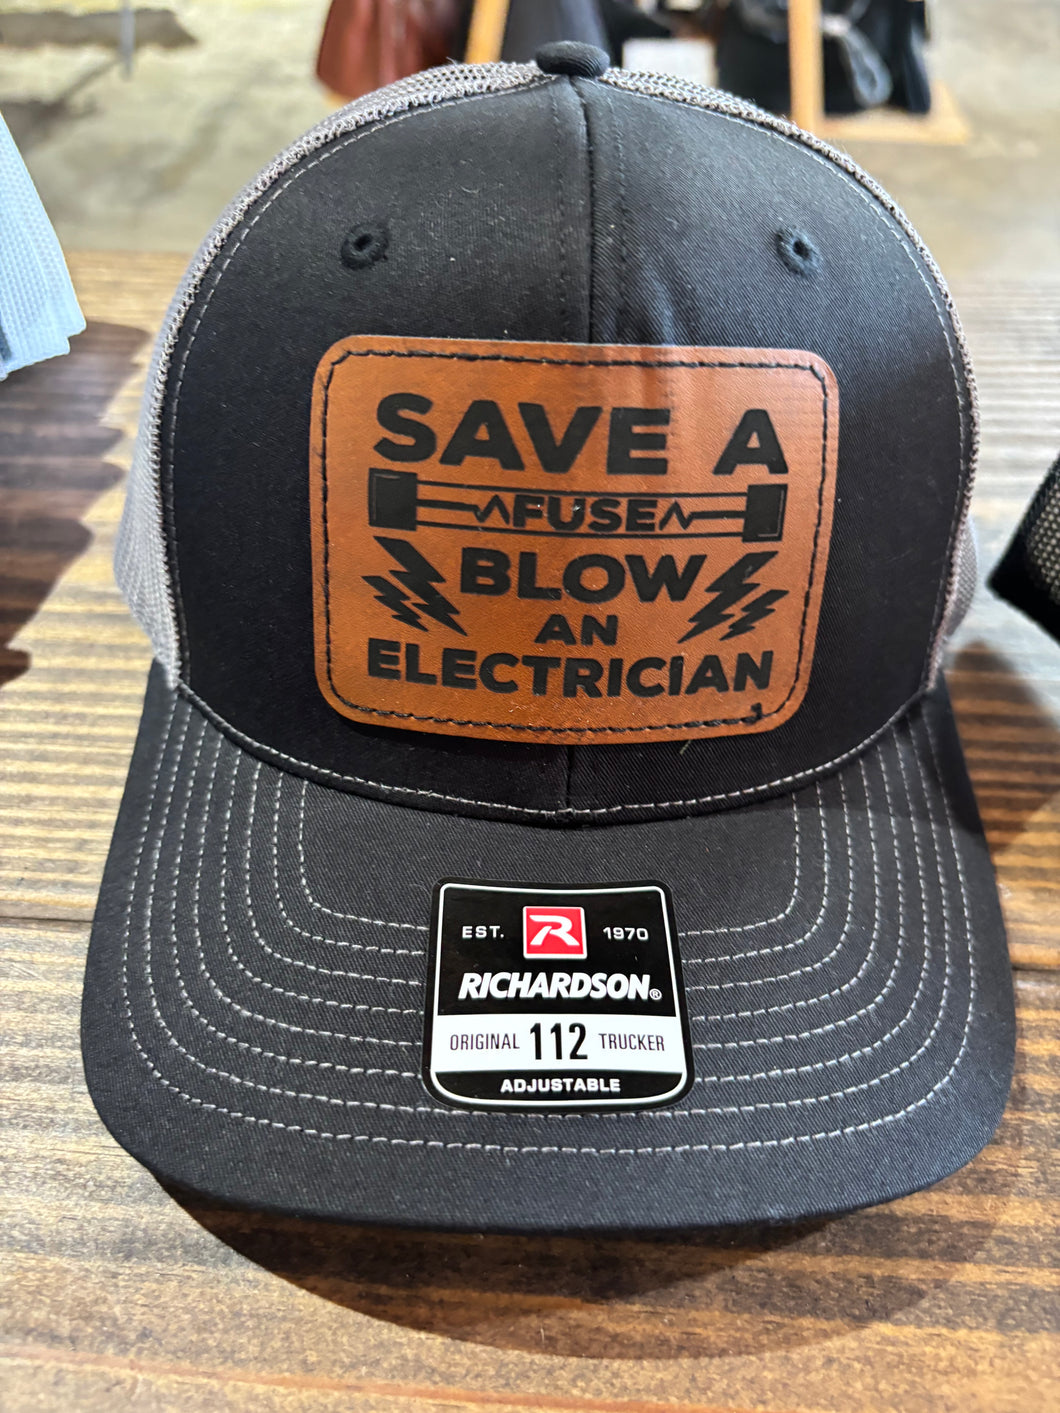 Save a fuse blow a electrician  (guy hat)